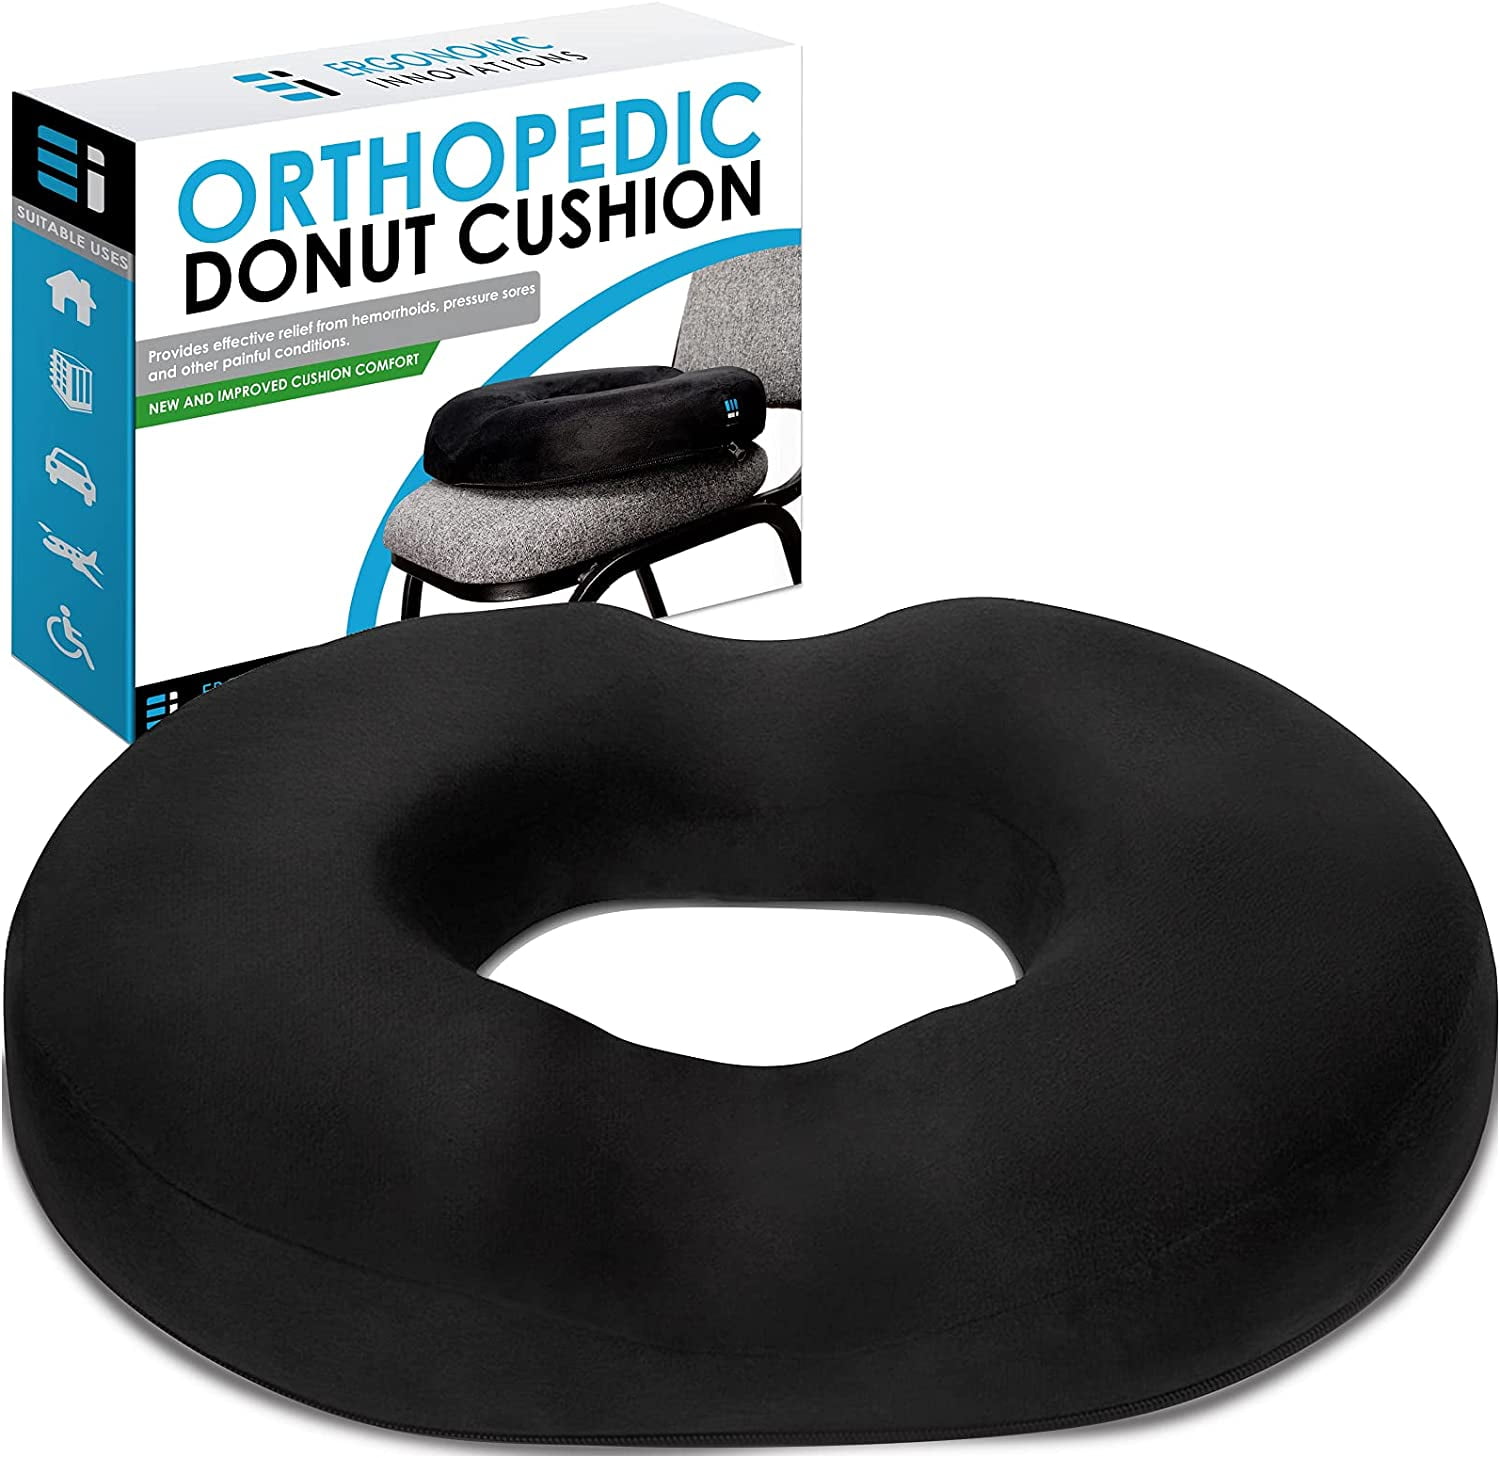 Emoobin Donut Pillow Hemorrhoid Tailbone Cushion Sciatica,18 Inches Black Post Natal Bed Sores Orthopedic Pain Relief Pillow for Pregnancy Coccyx